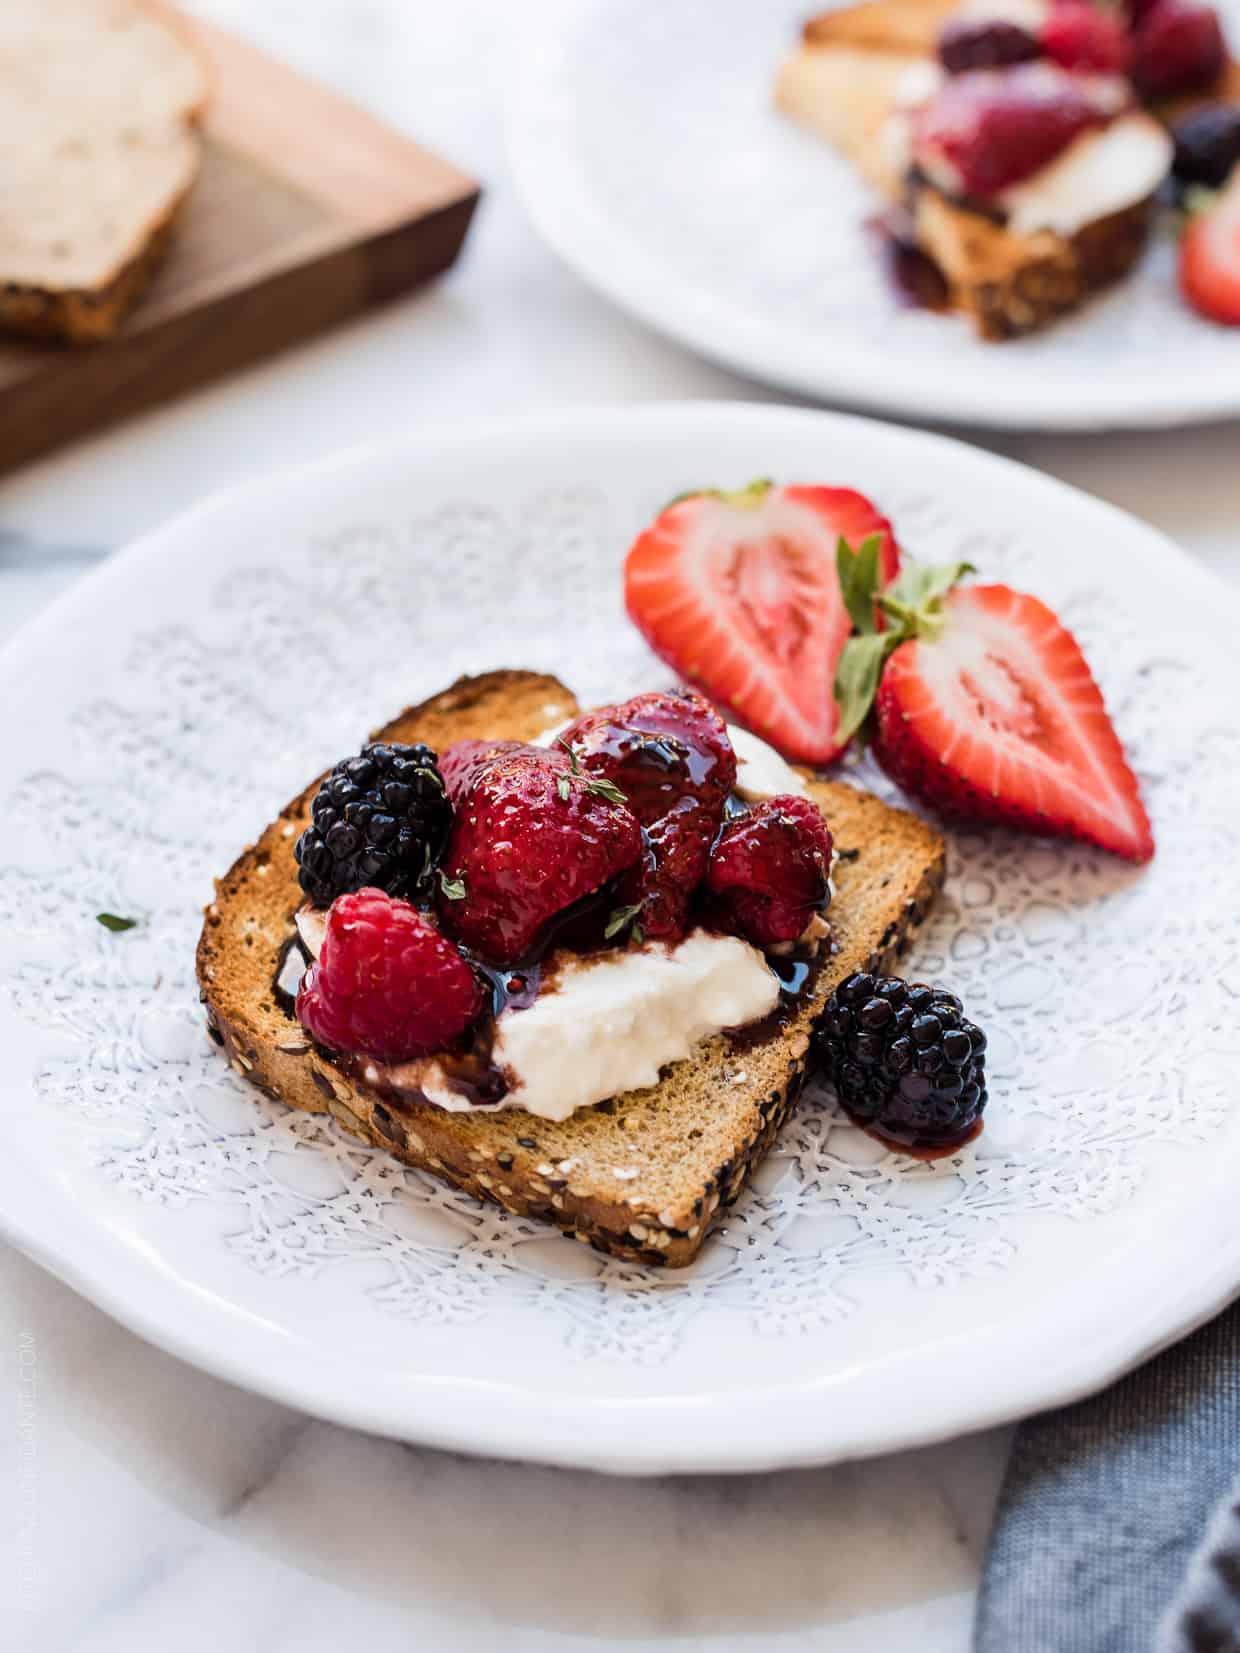 Burrata Toast with Balsamic Berries is the luscious snack you've been craving. Decadent burrata cheese drizzled with savory berries for the ultimate toast.